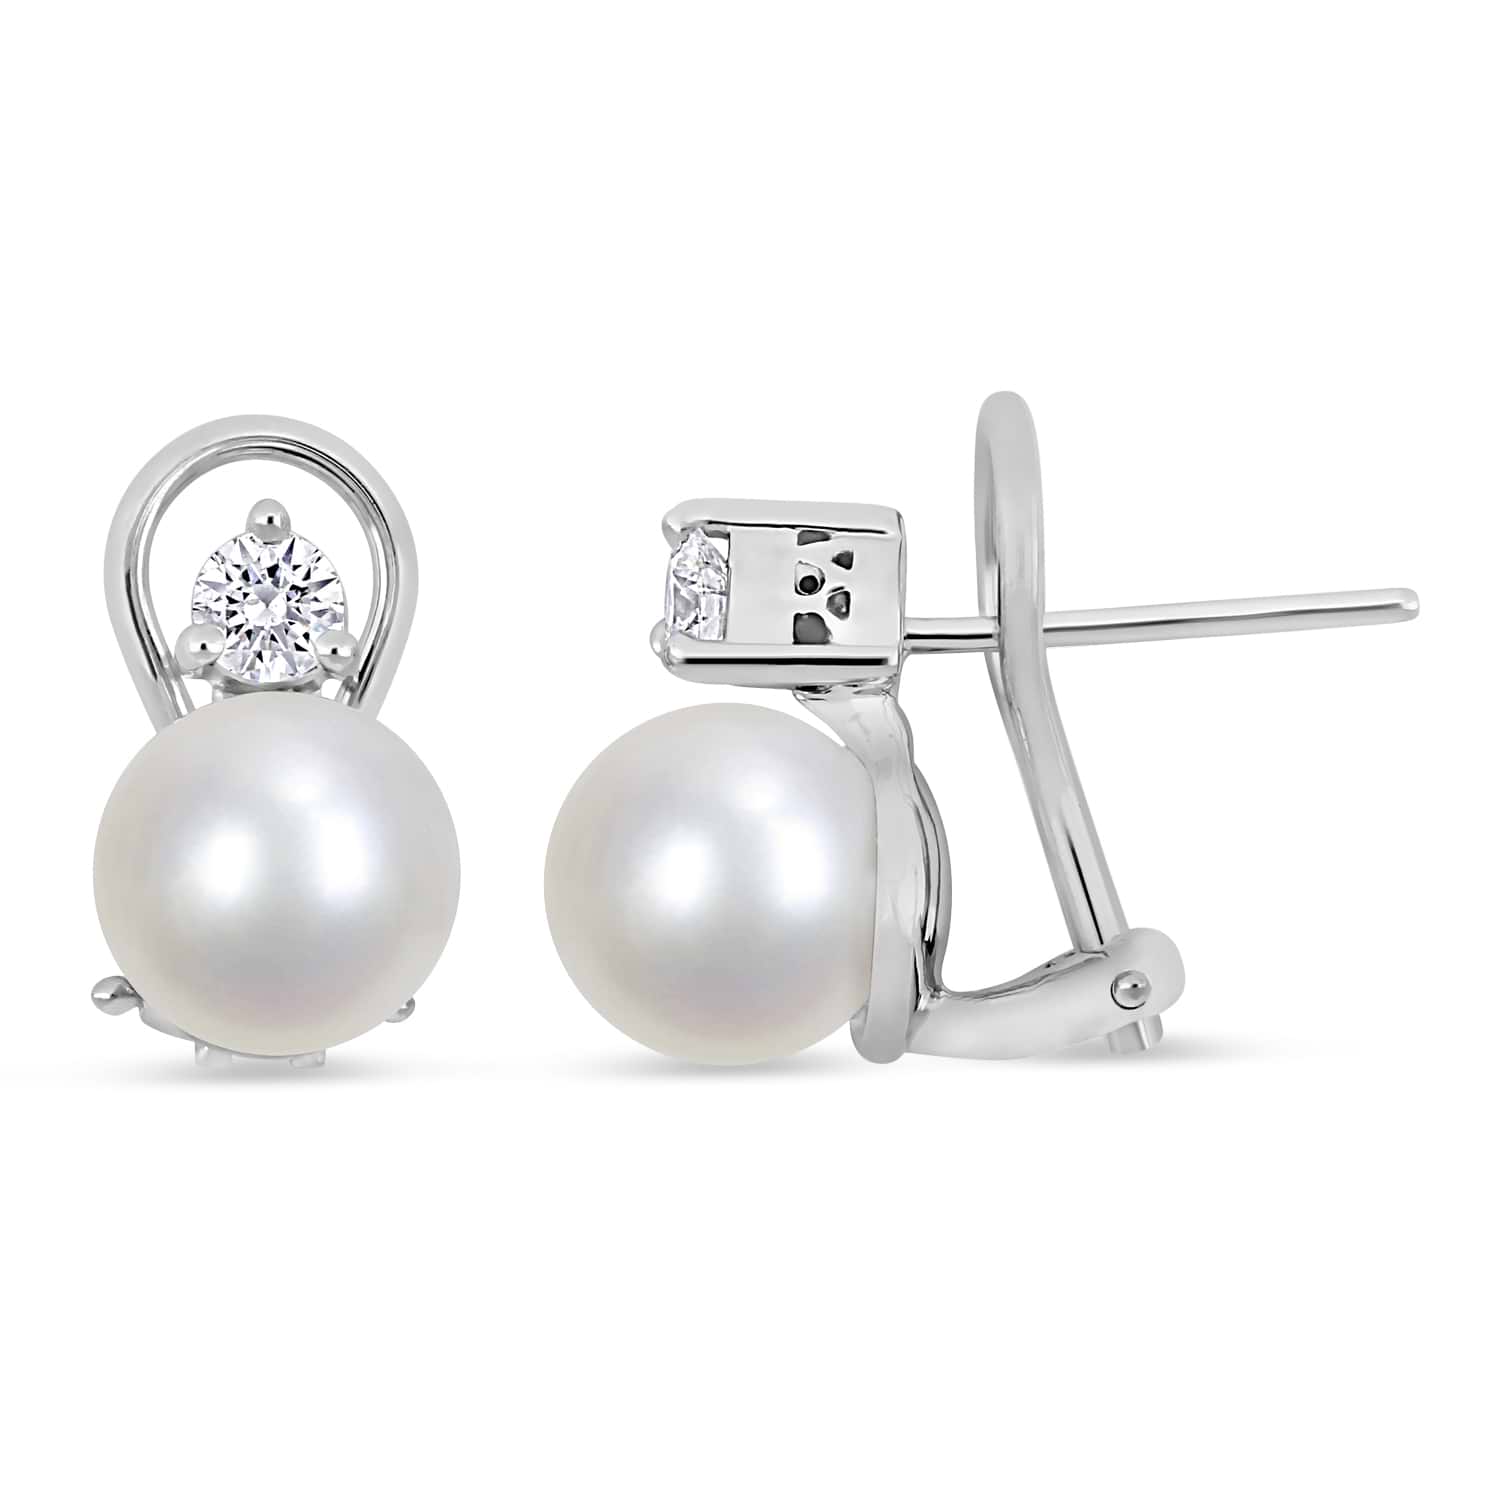 Round Akoya Cultured White Pearl and Diamond Clip Back Earrings 14k White Gold (0.30 ct)